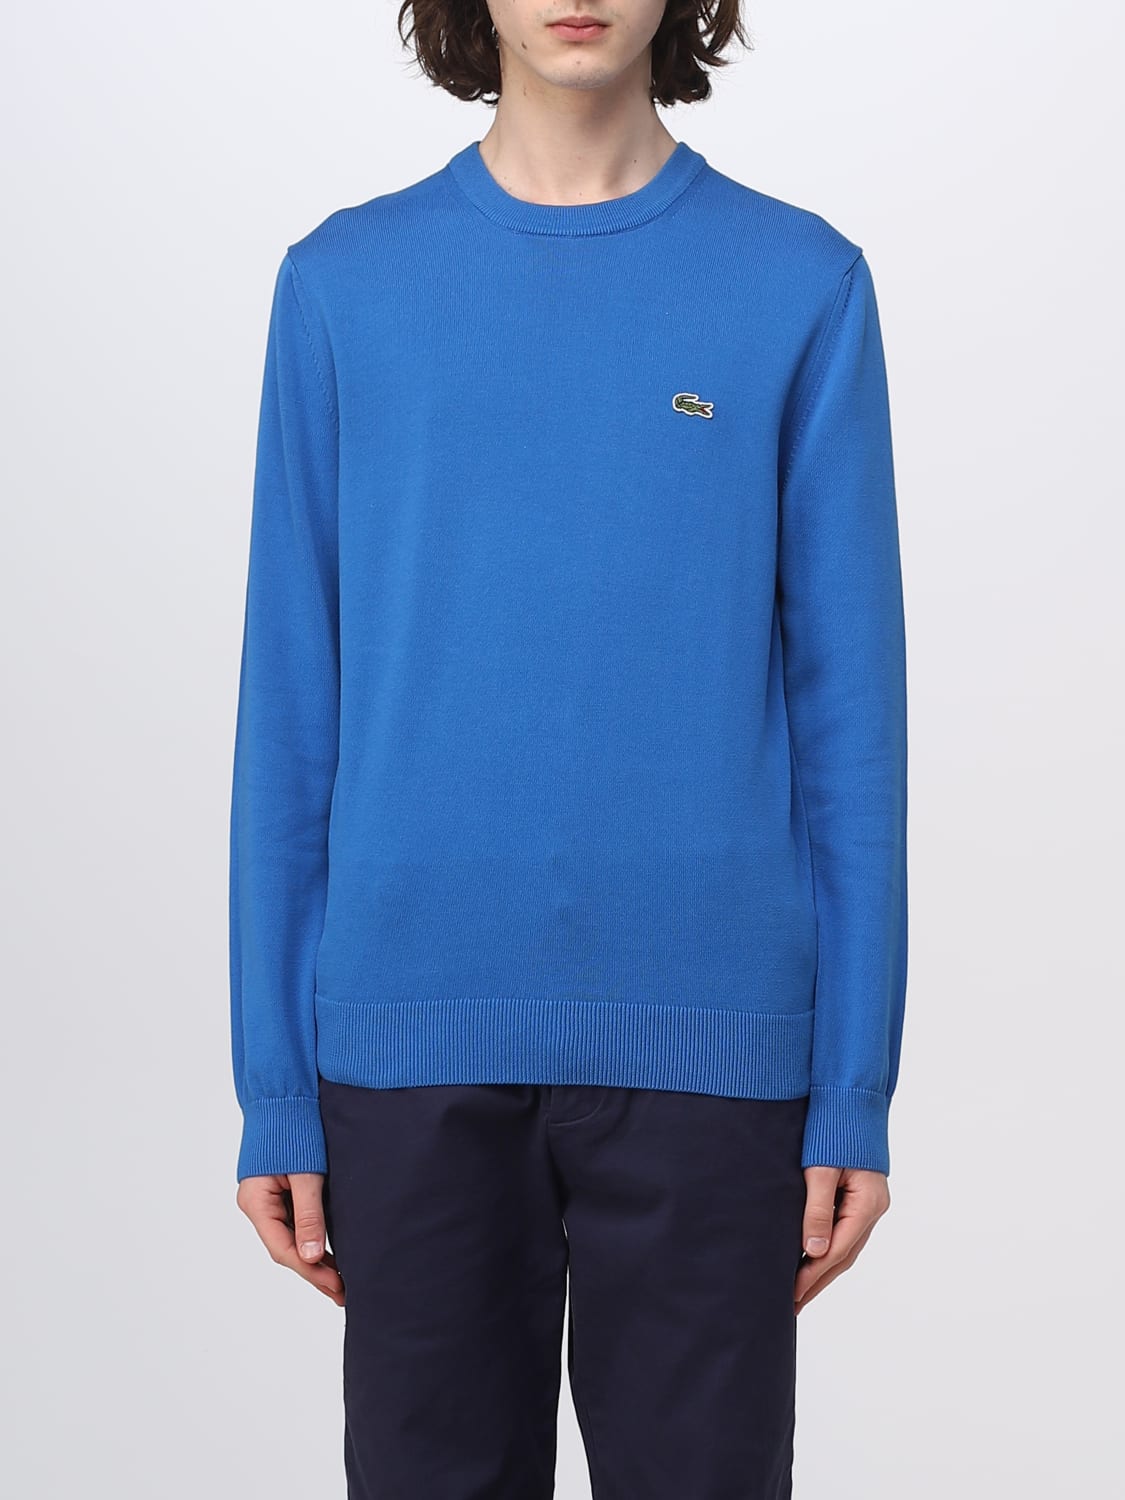 pen Perseus Minefelt LACOSTE: sweater for man - Blue | Lacoste sweater AH1985 online at  GIGLIO.COM